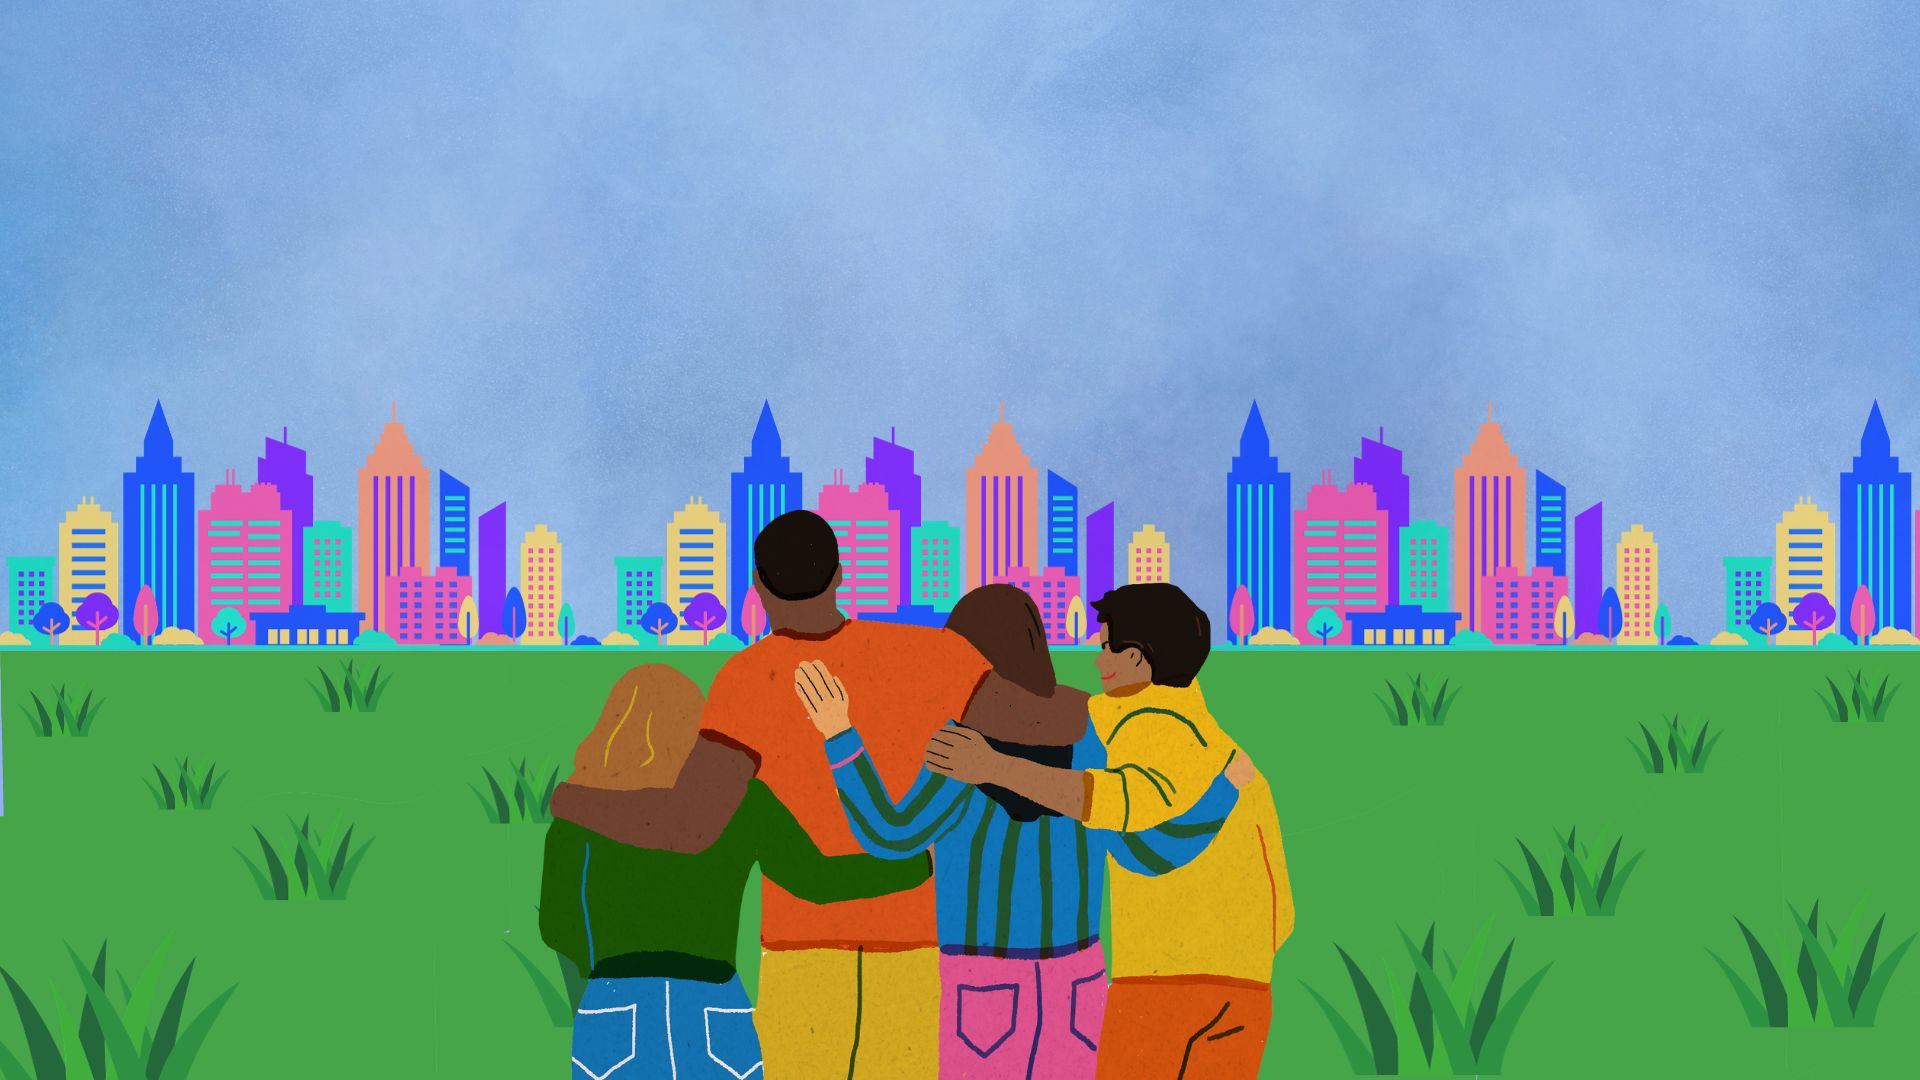 a cartoon image of a group of people gathered in the foreground of a brightly-colored city scape with grass 